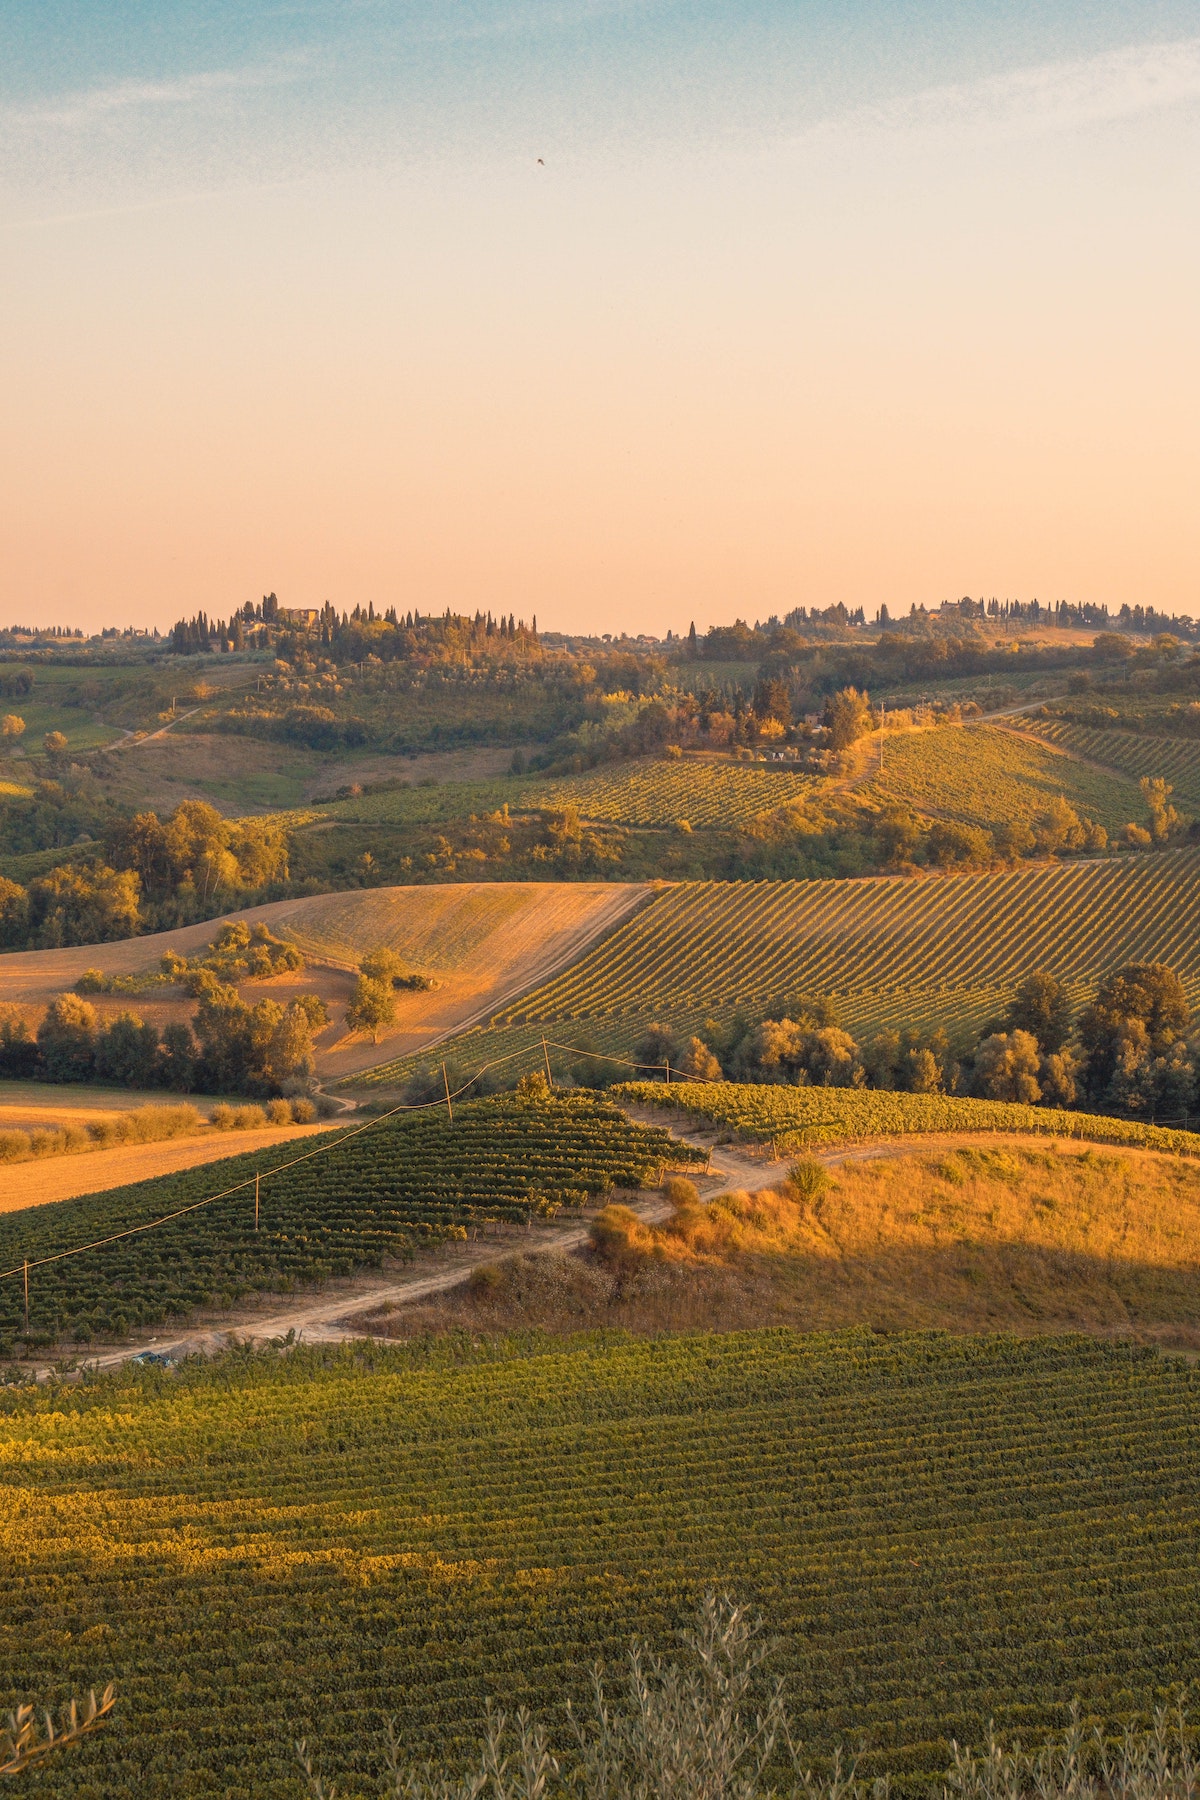 Rolling hills with vineyards at sunset